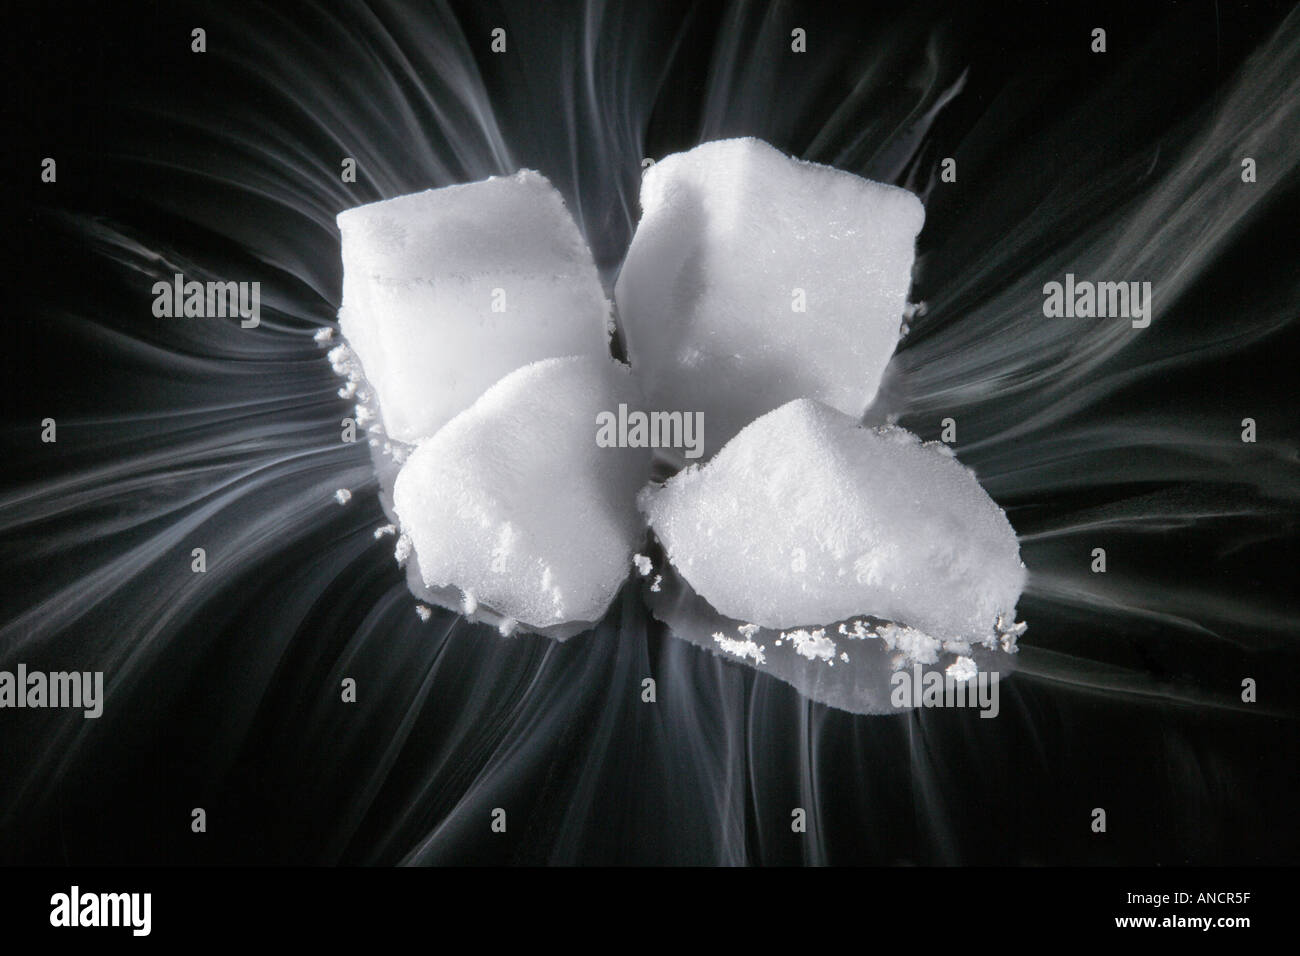 Dry Ice Frozen Carbon Dioxide Stock Photo - Alamy